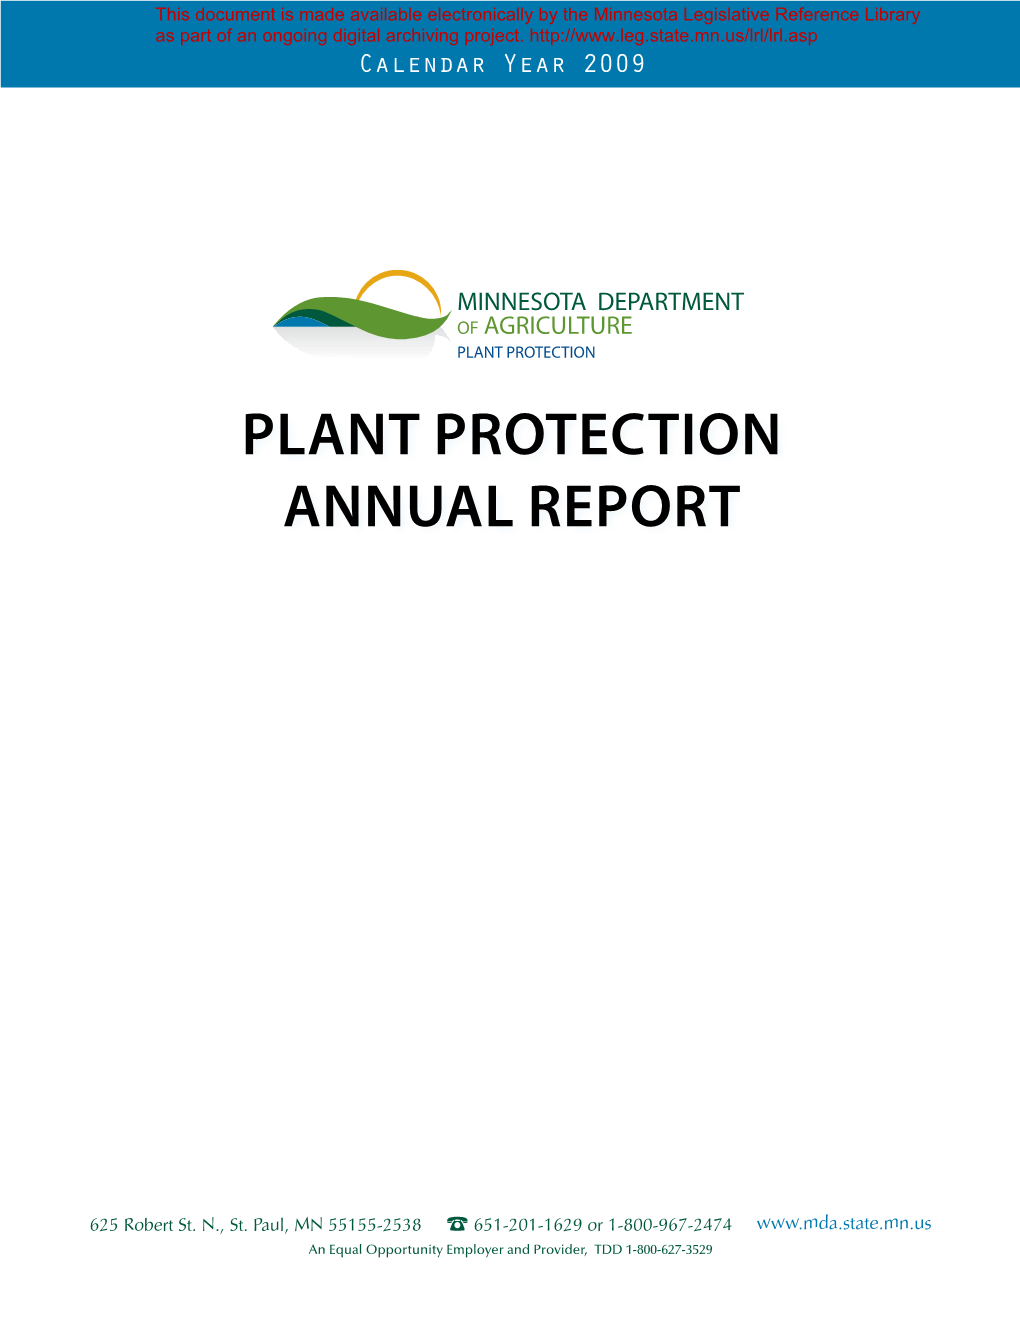 Plant Protection Annual Report